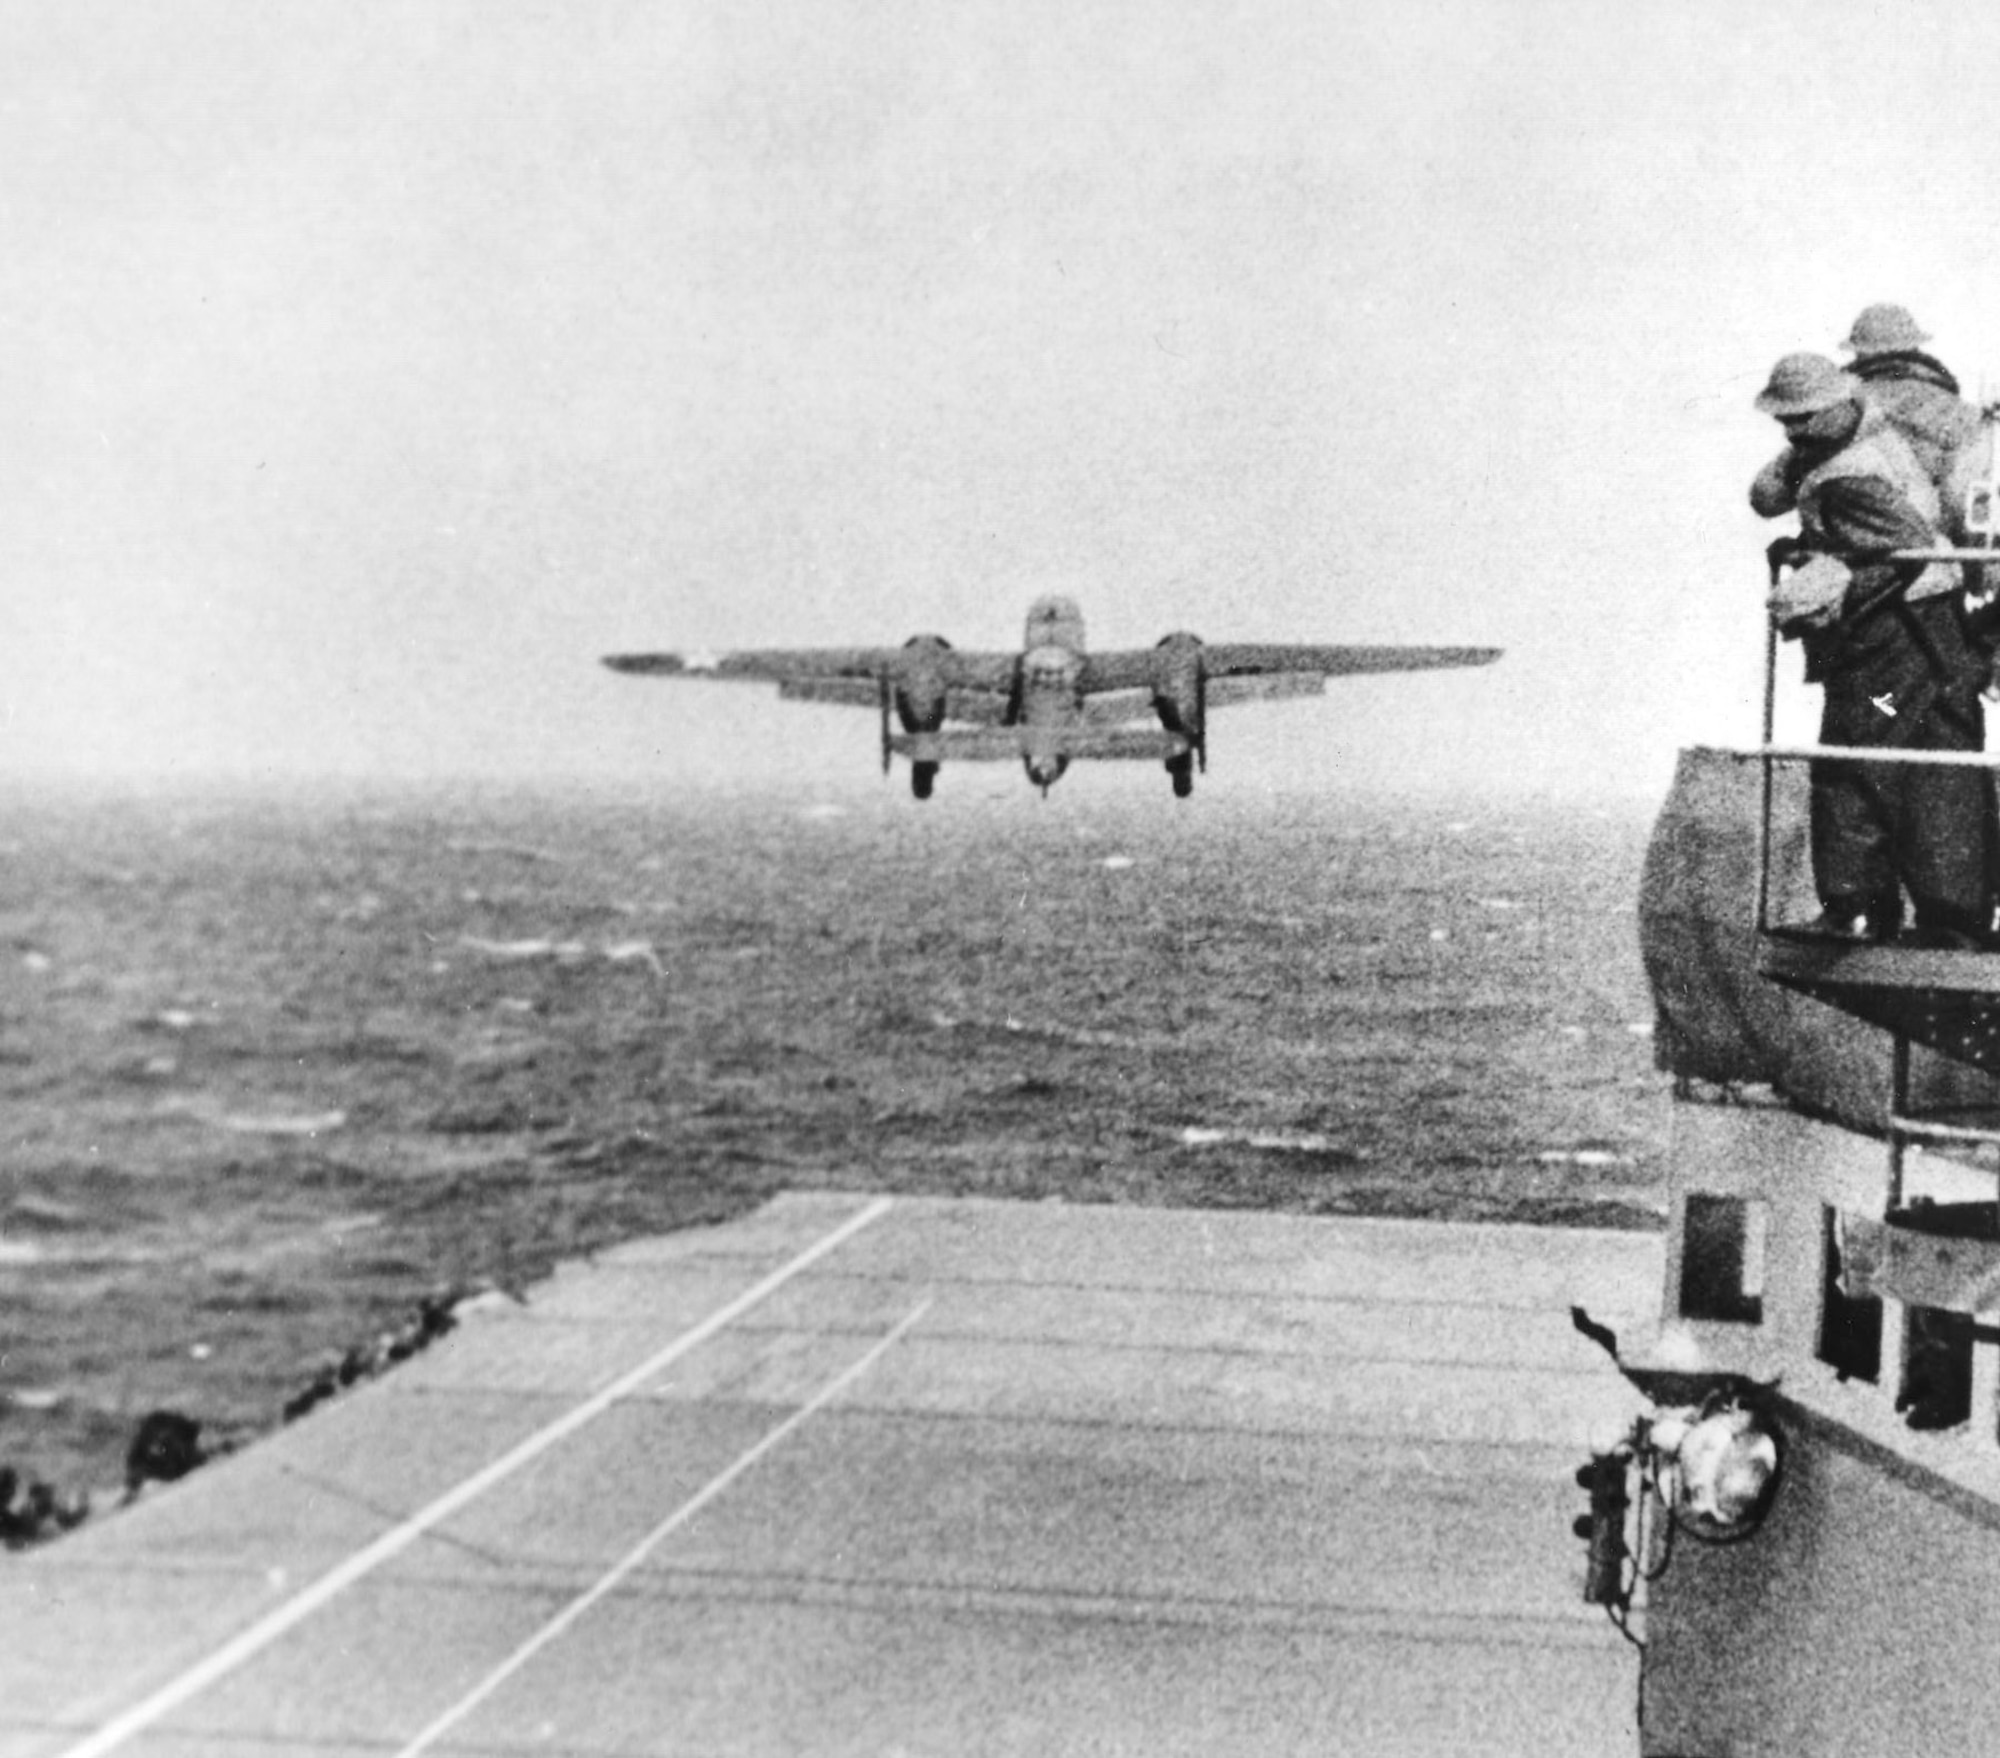 The aircraft carrier Hornet had 16 AAF B-25s on deck, ready for the Tokyo Raid. (U.S. Air Force photo)